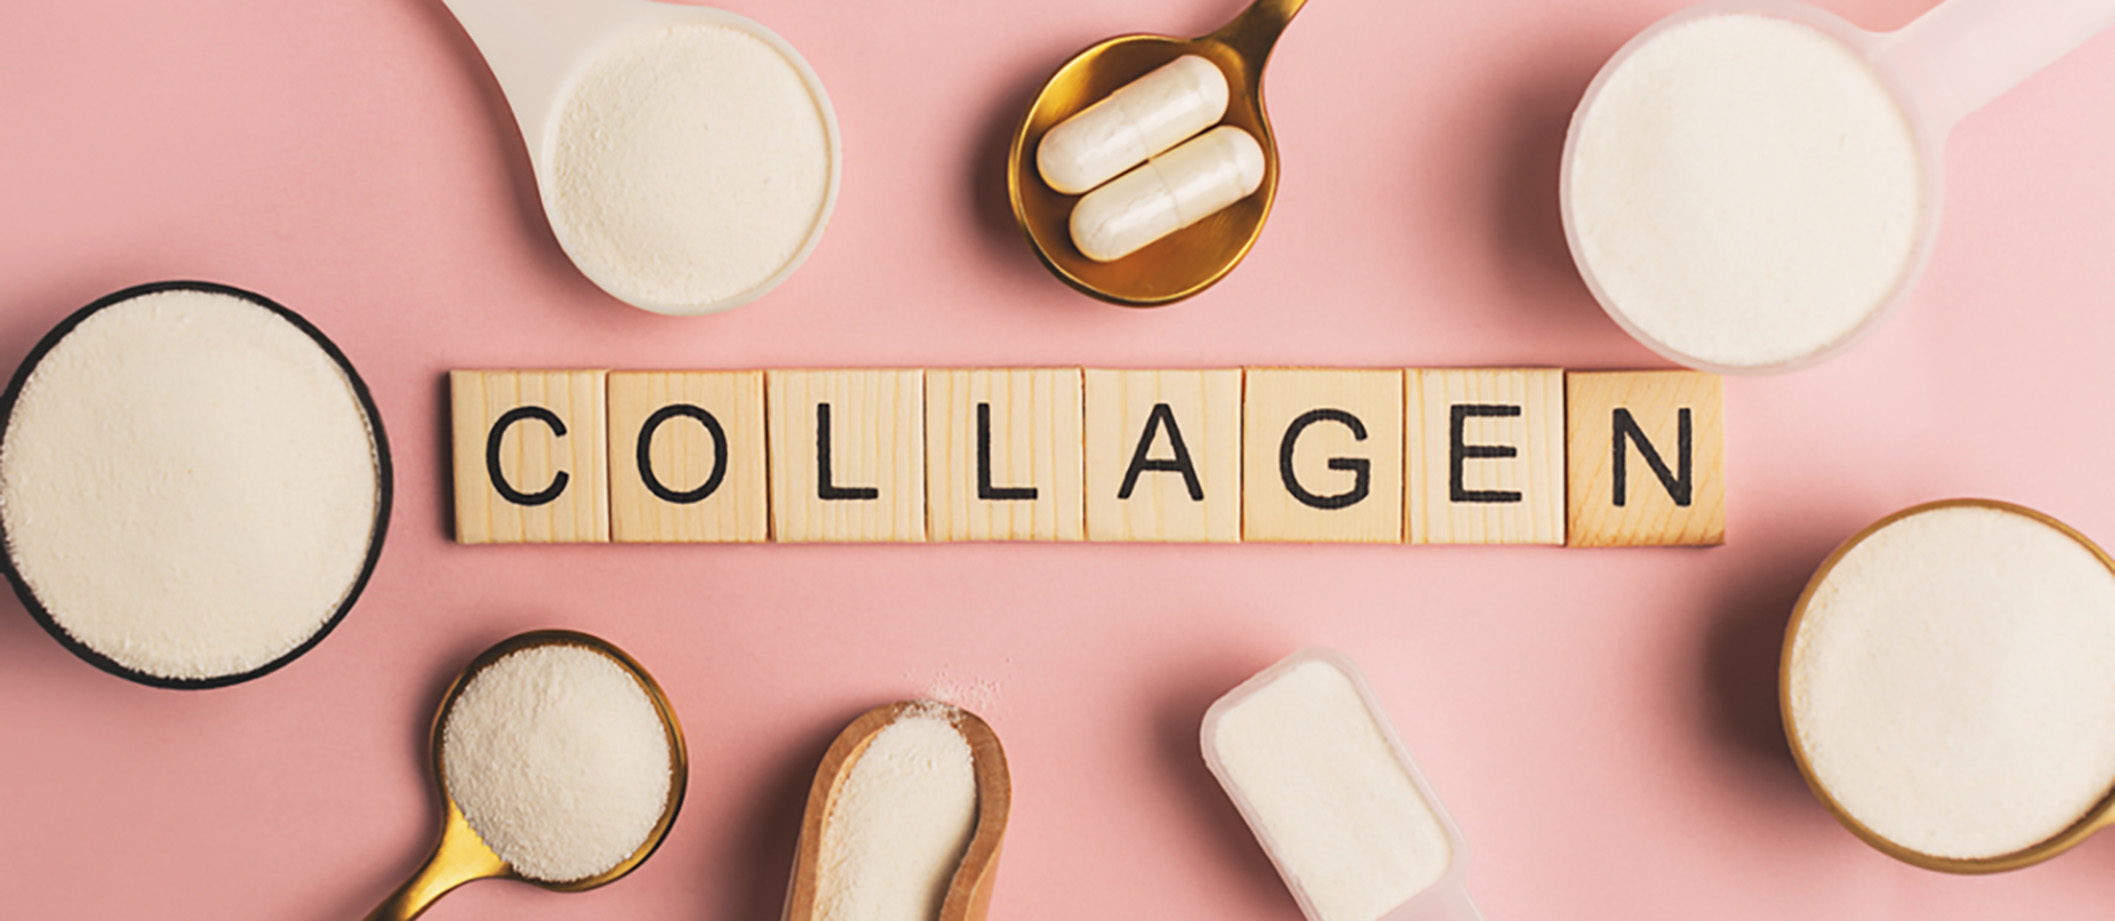 Spoons filled with powders and capsules surround the word collagen in wooden letters.